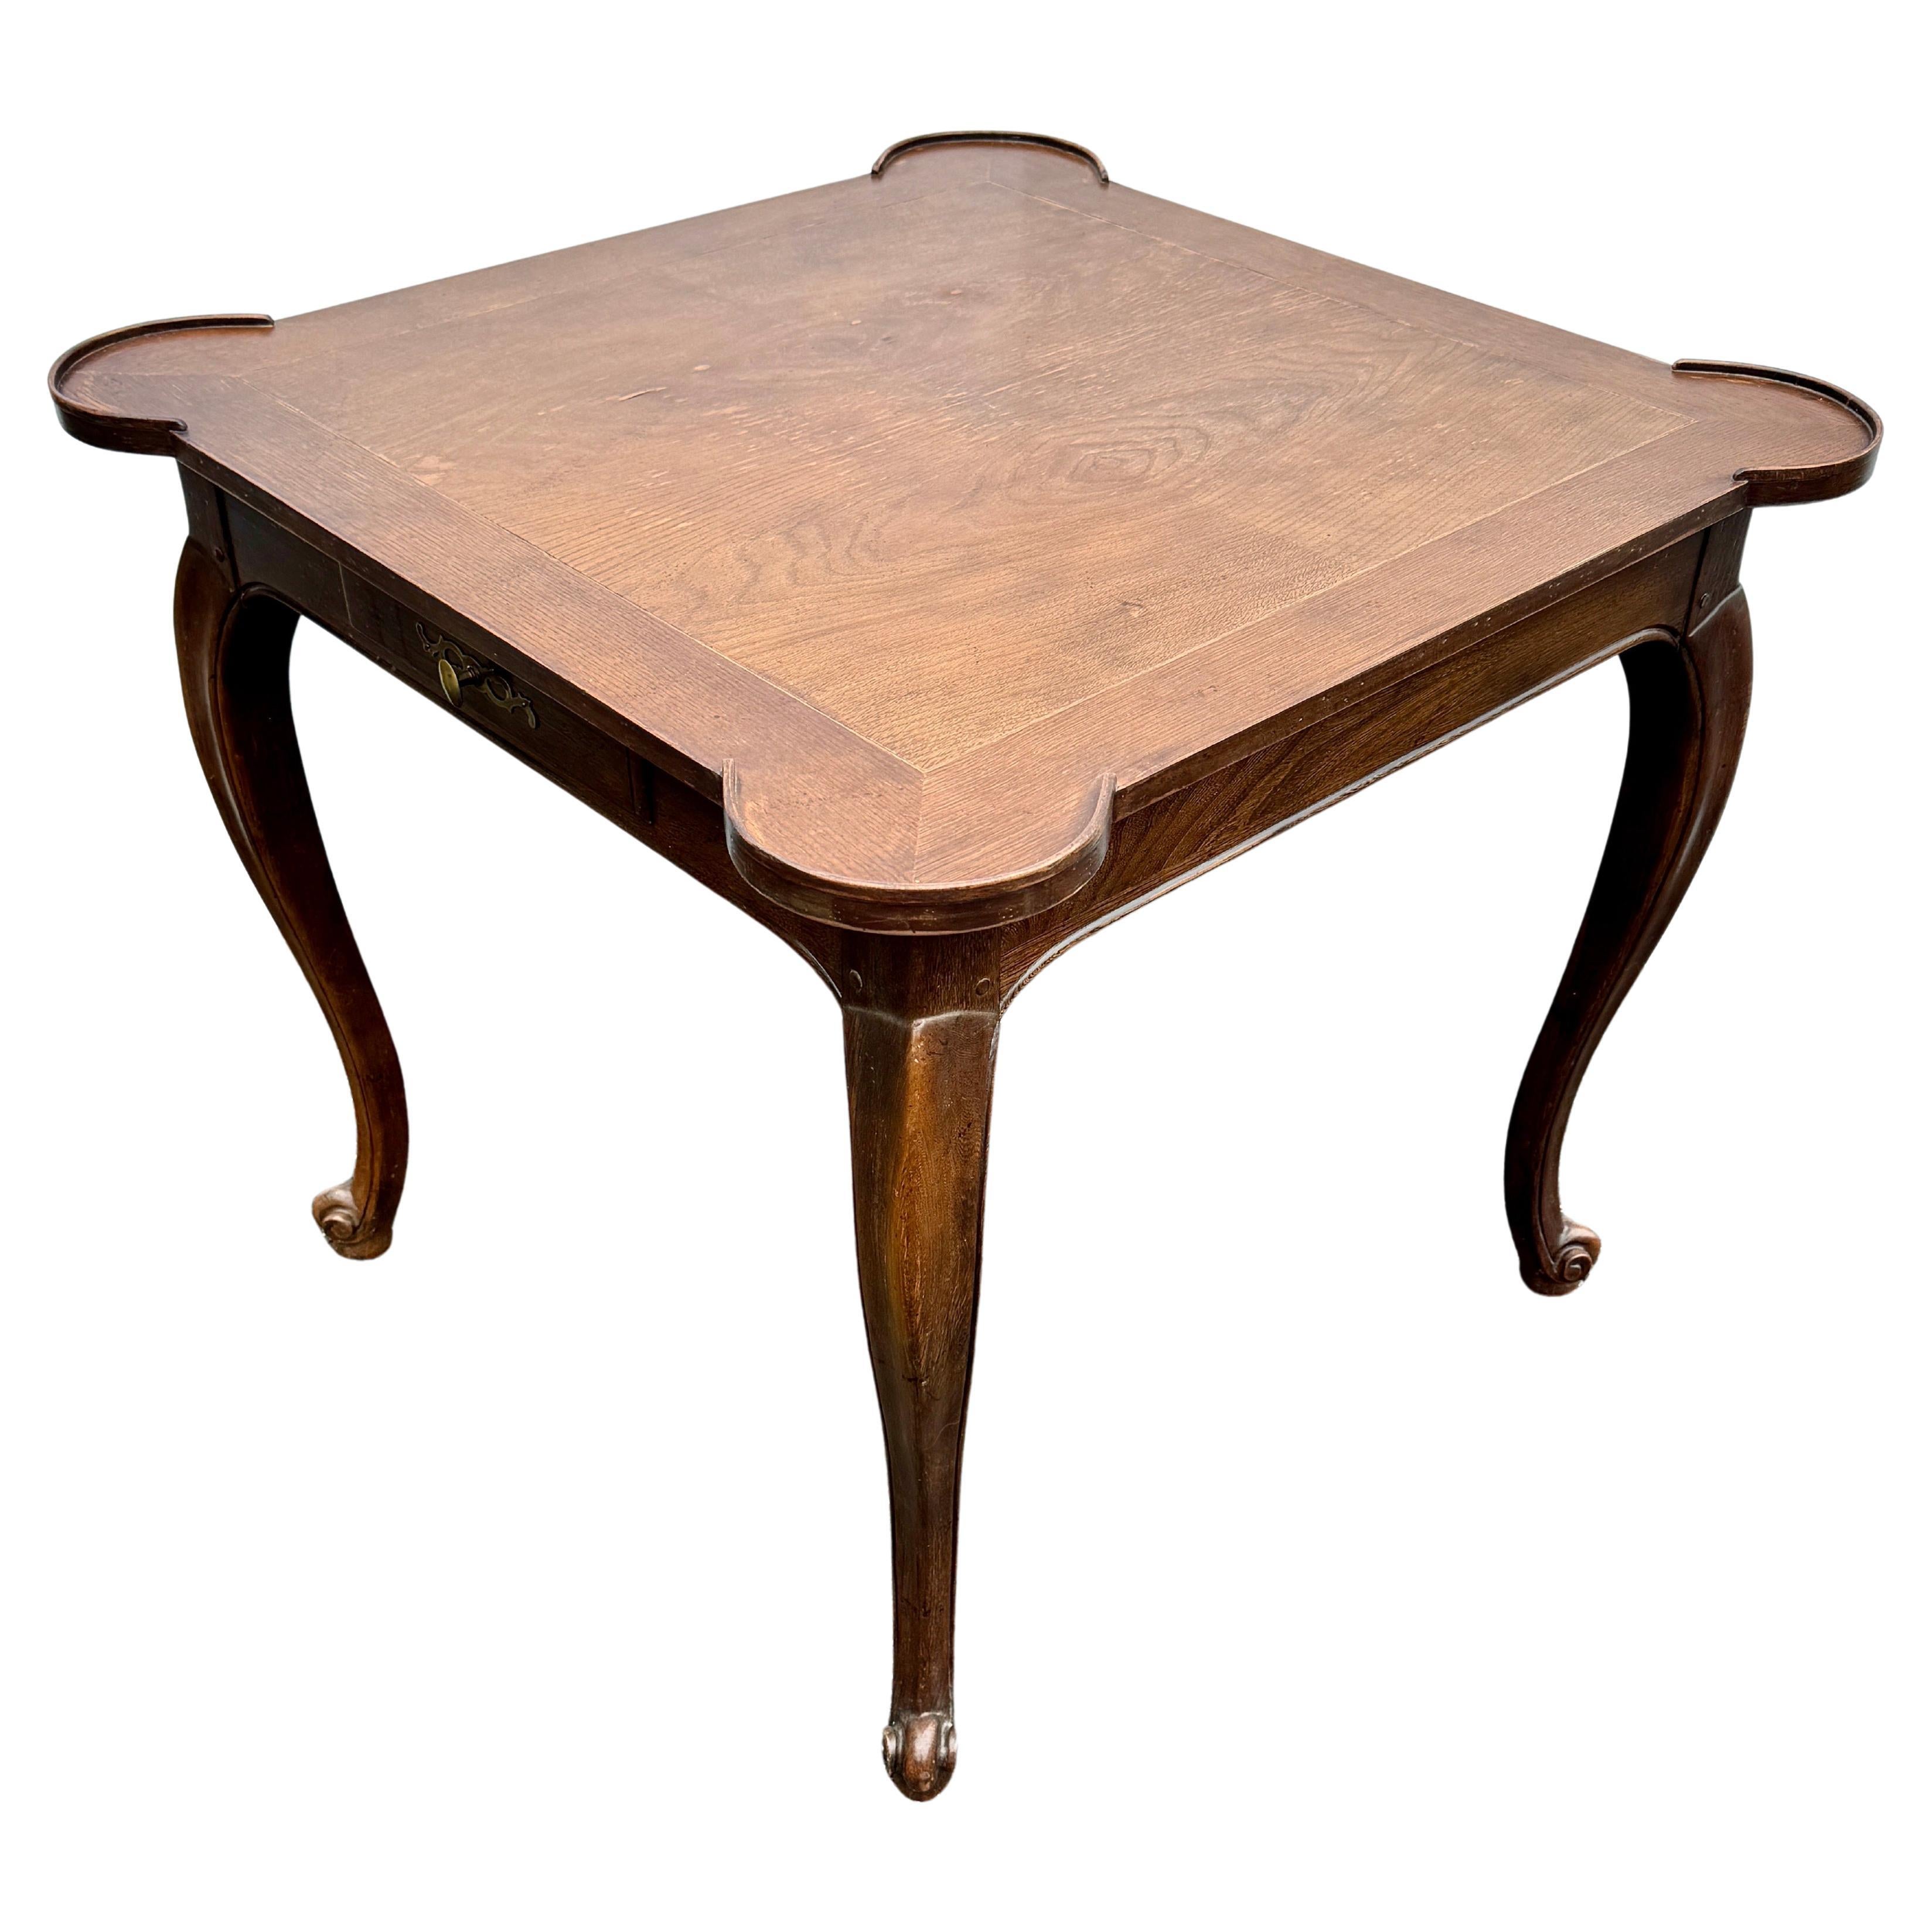 Vintage Square Wood Game Dining Table by The Baker Furniture Company

Classic and versatile game table in its original condition. This one drawer table features rounded corners and cabriole legs. Very solid table that is marked Baker Furniture